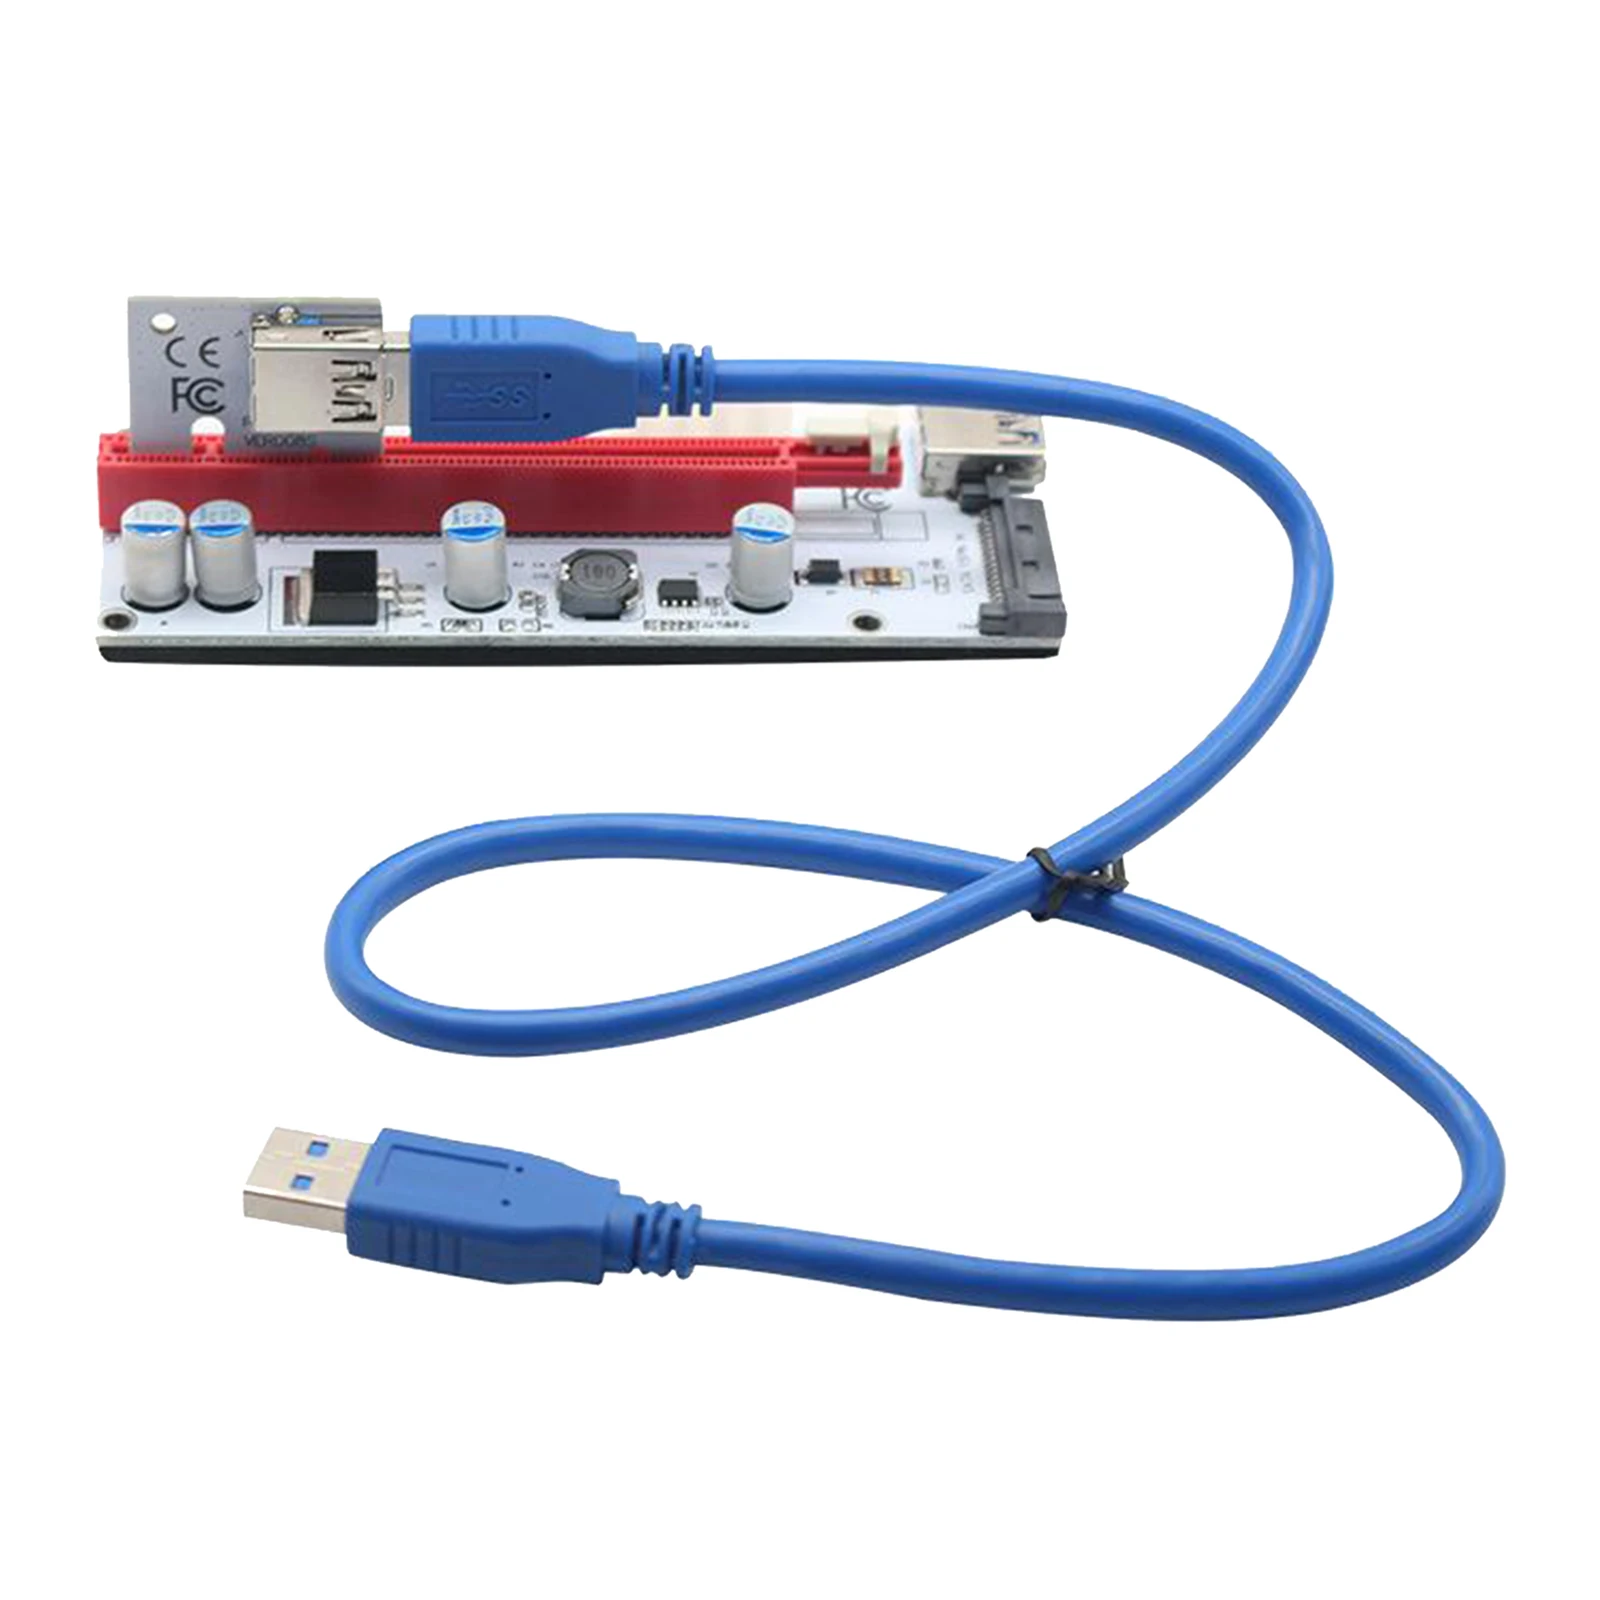 PCI-E Riser Card 008s 1x to 16x Graphic Extension Adapter Card Extender, Stable and Safe